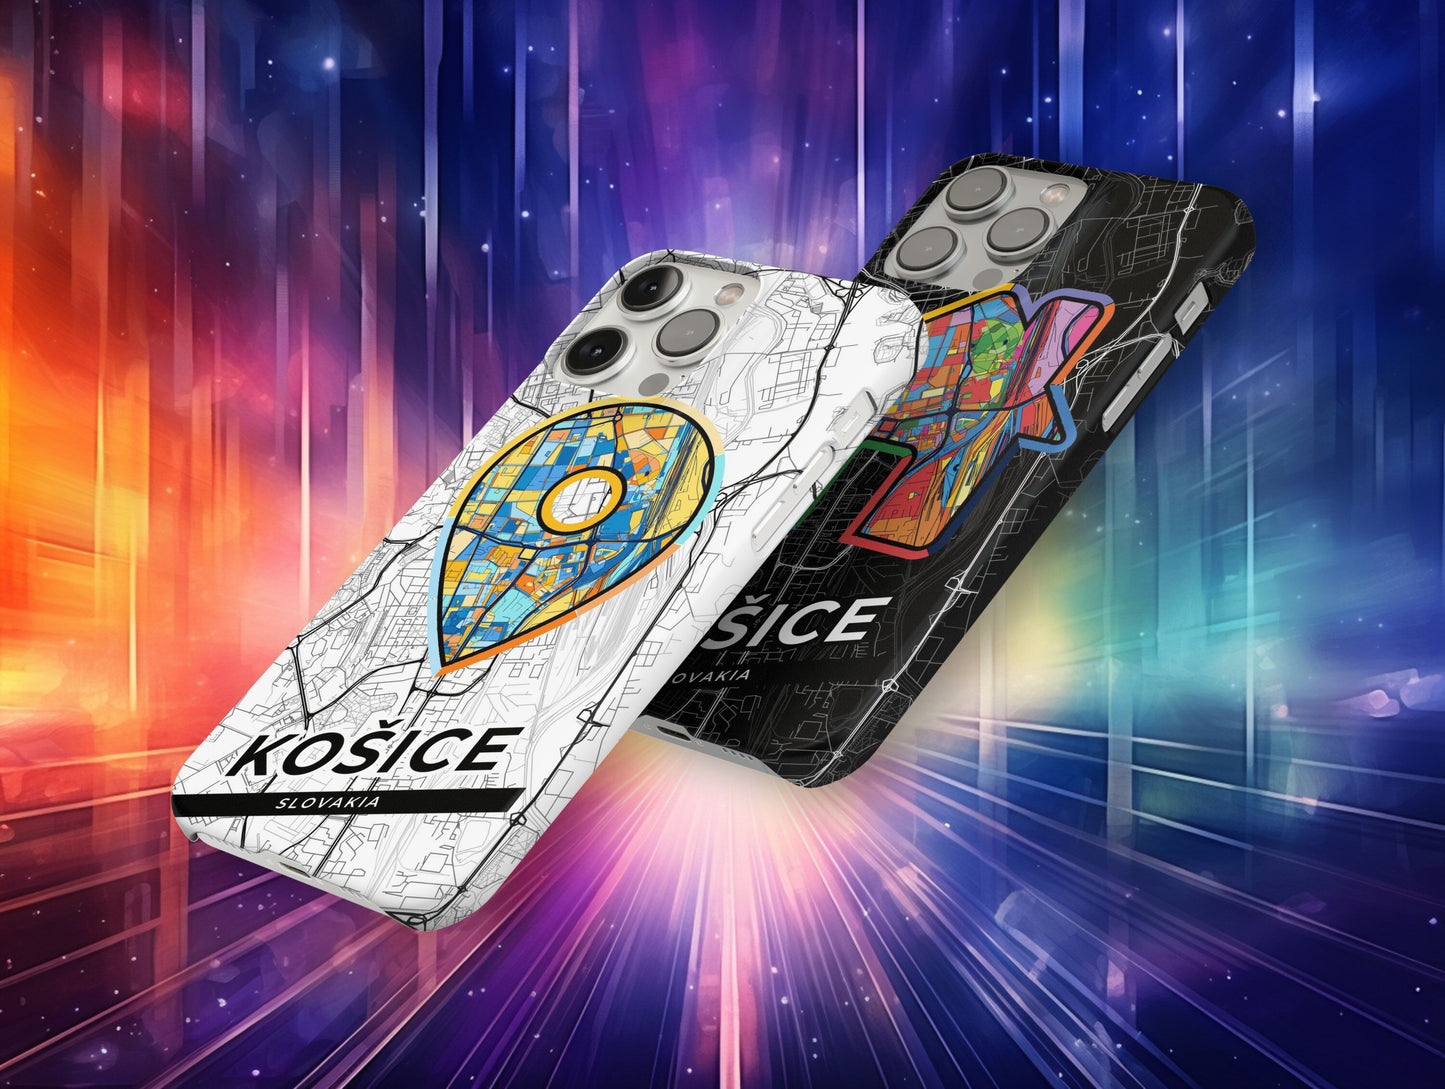 Košice Slovakia slim phone case with colorful icon. Birthday, wedding or housewarming gift. Couple match cases.